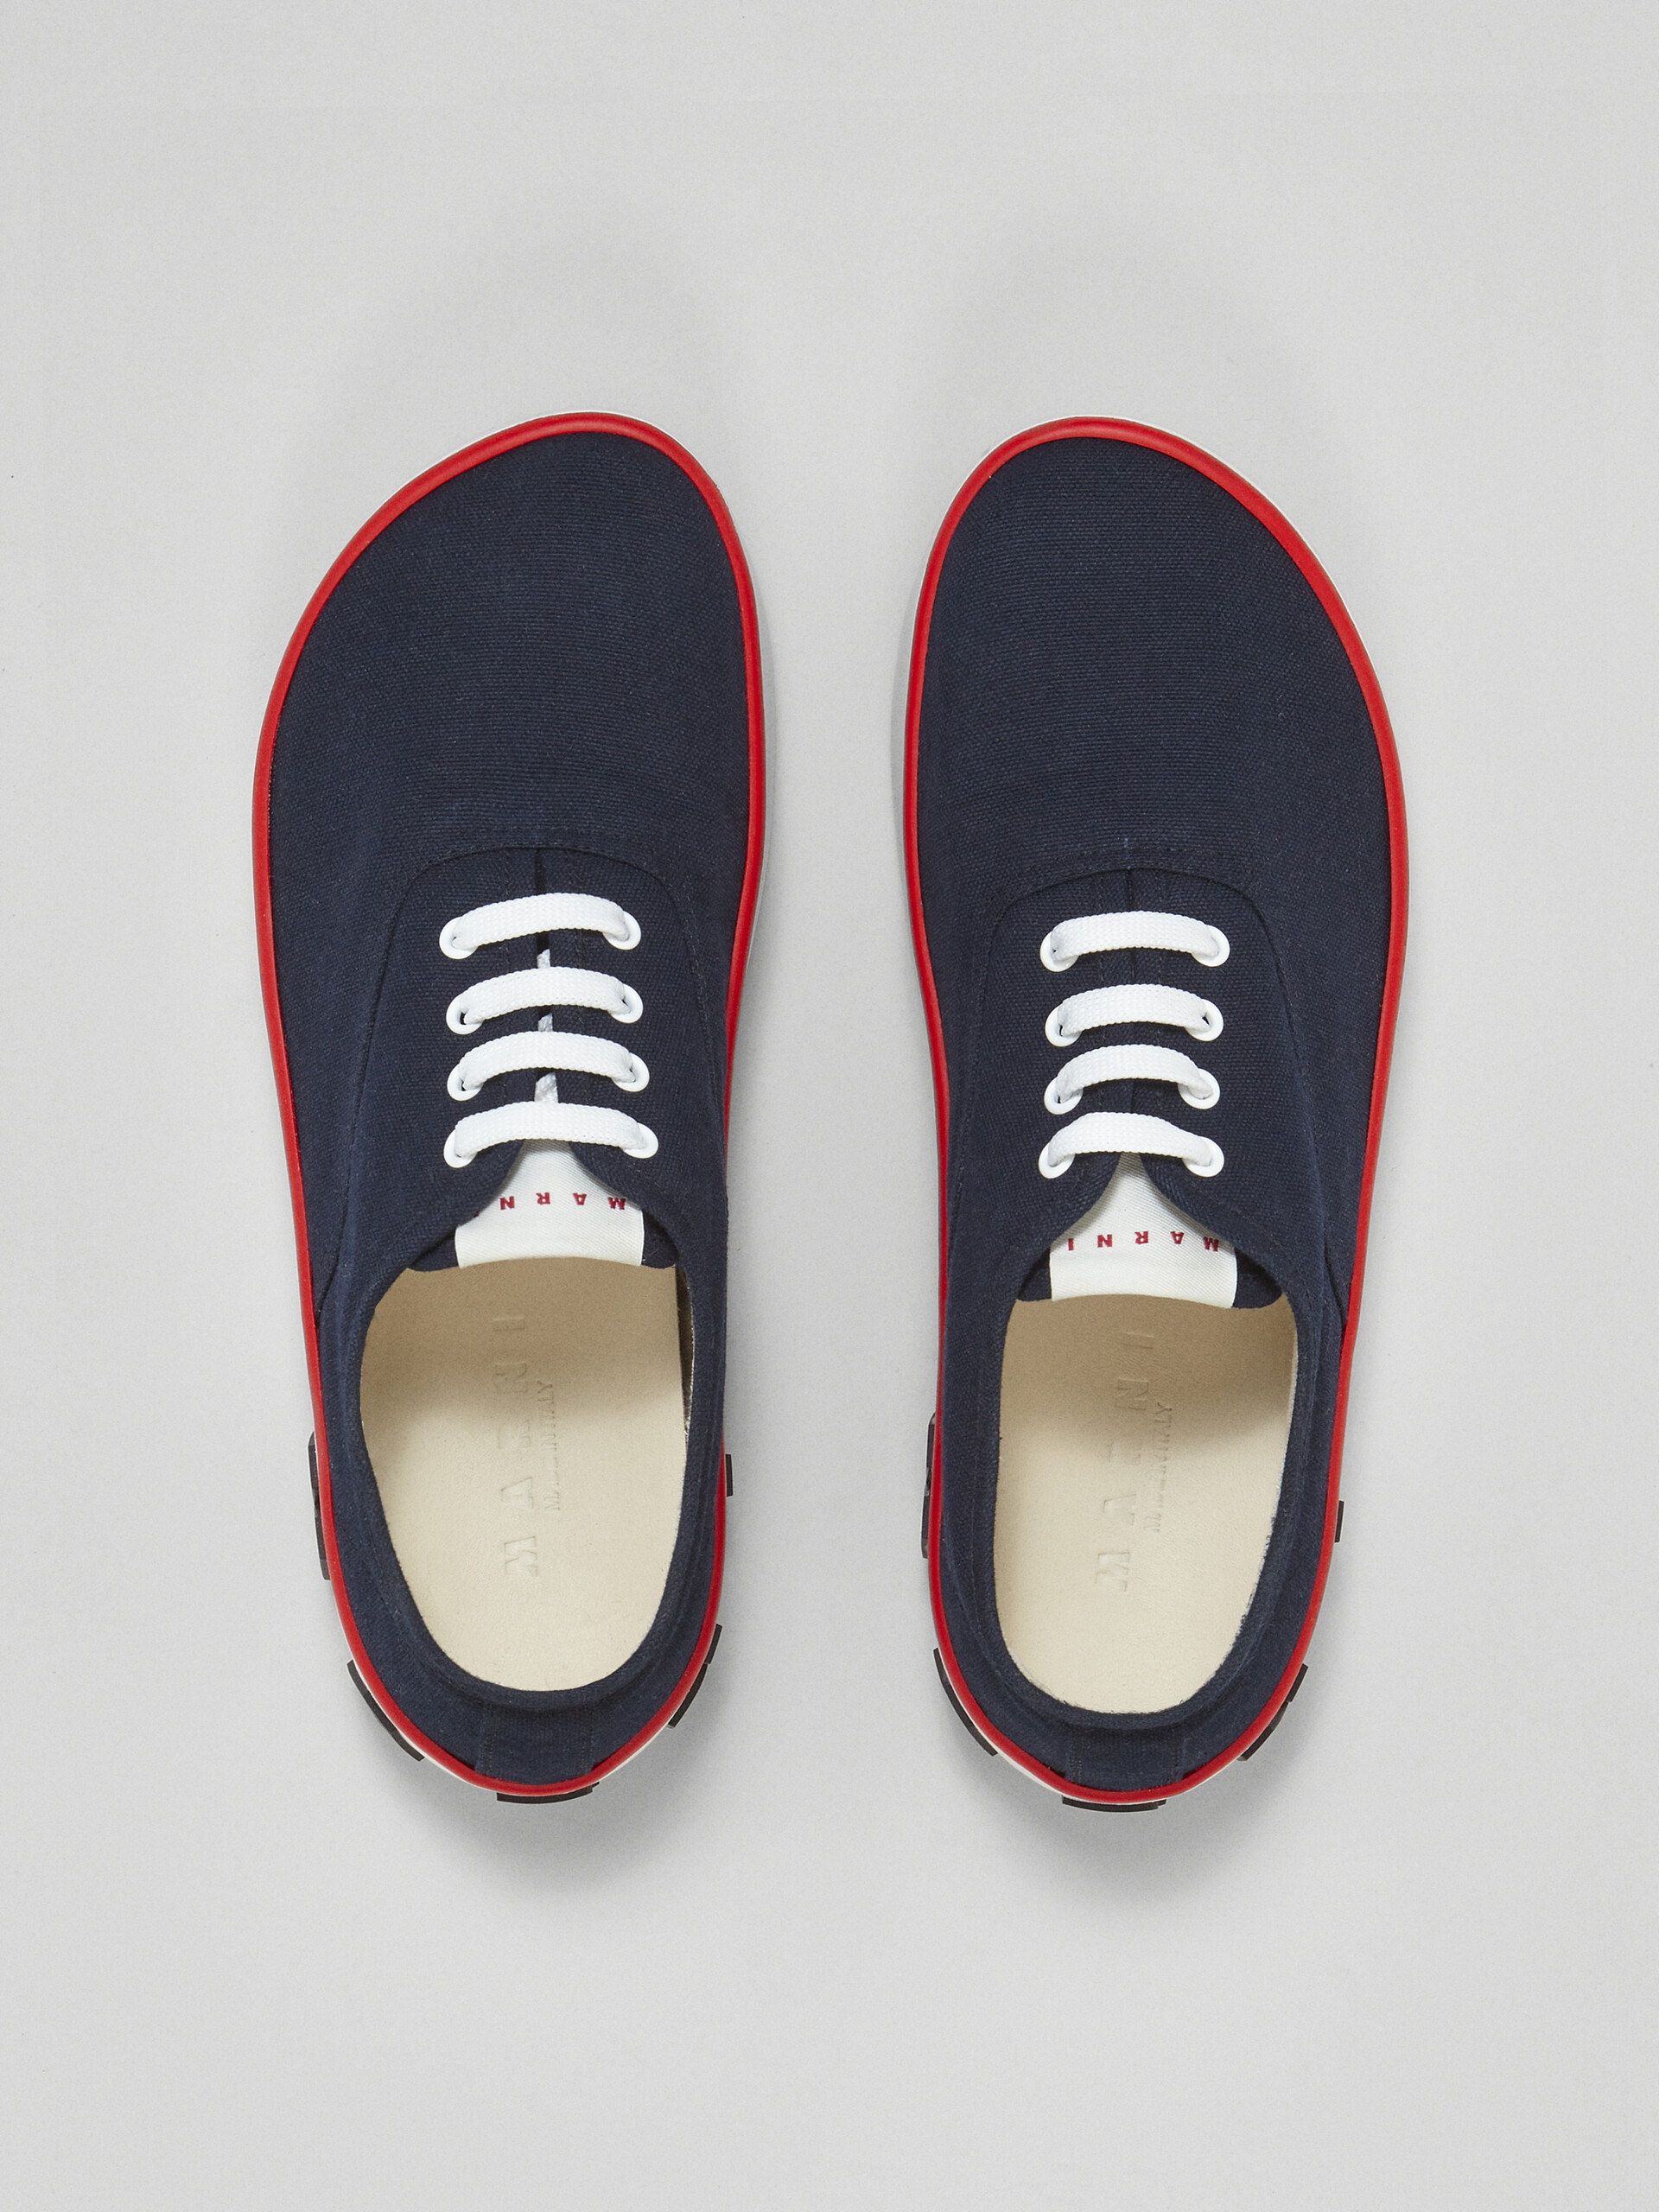 Blue canvas sneaker with maxi logo - Sneakers - Image 4